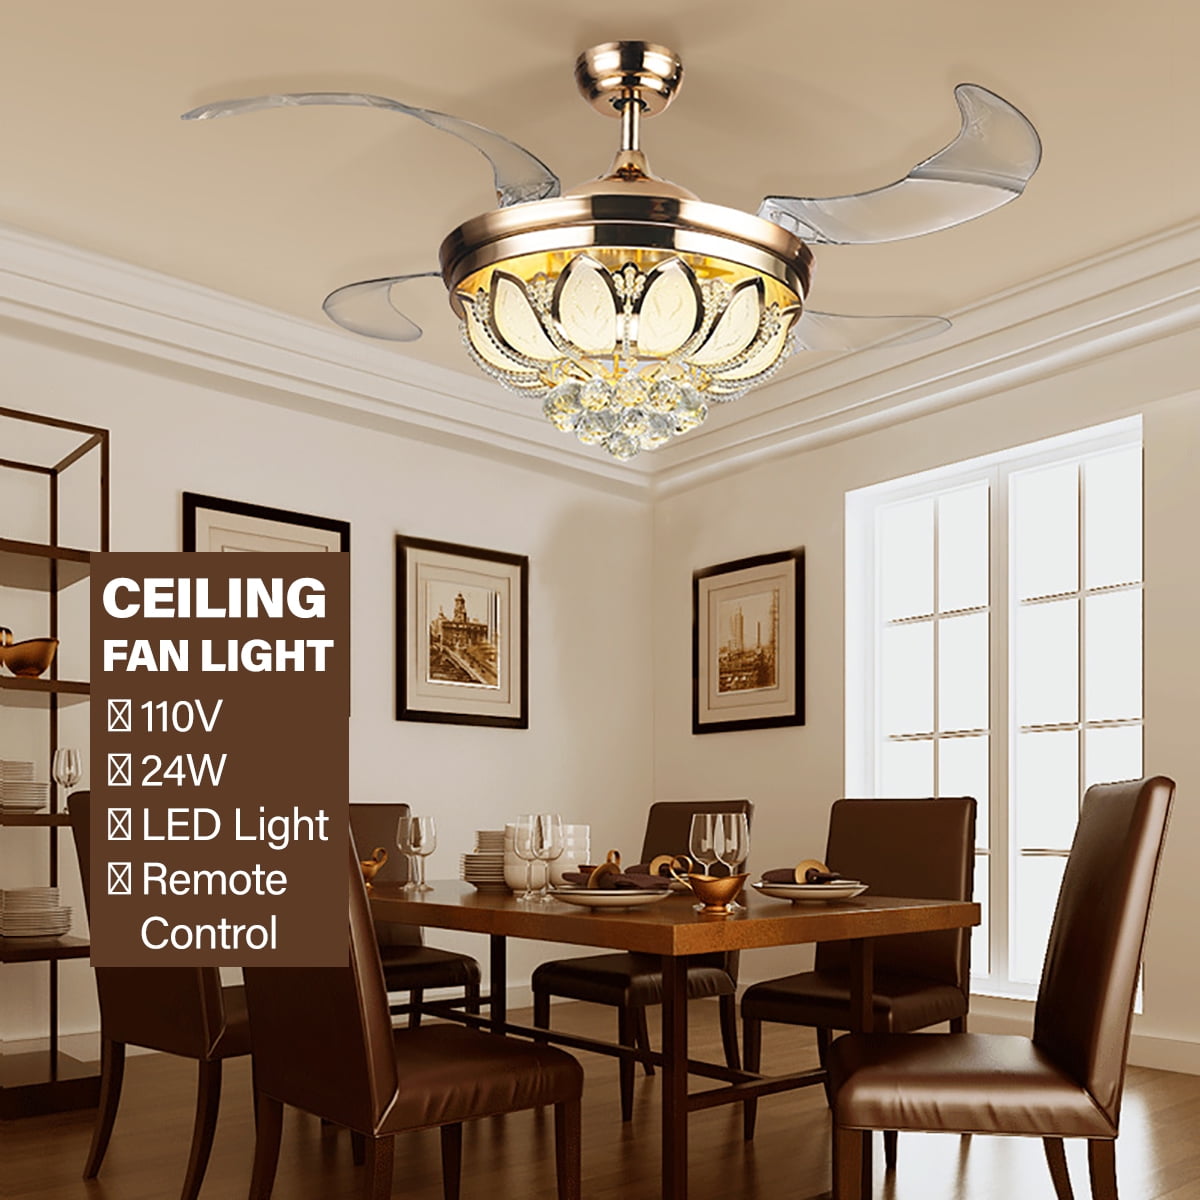 36" Retractable Blade Ceiling Fan Light LED Chandelier Dining Room Lamp+Remote 